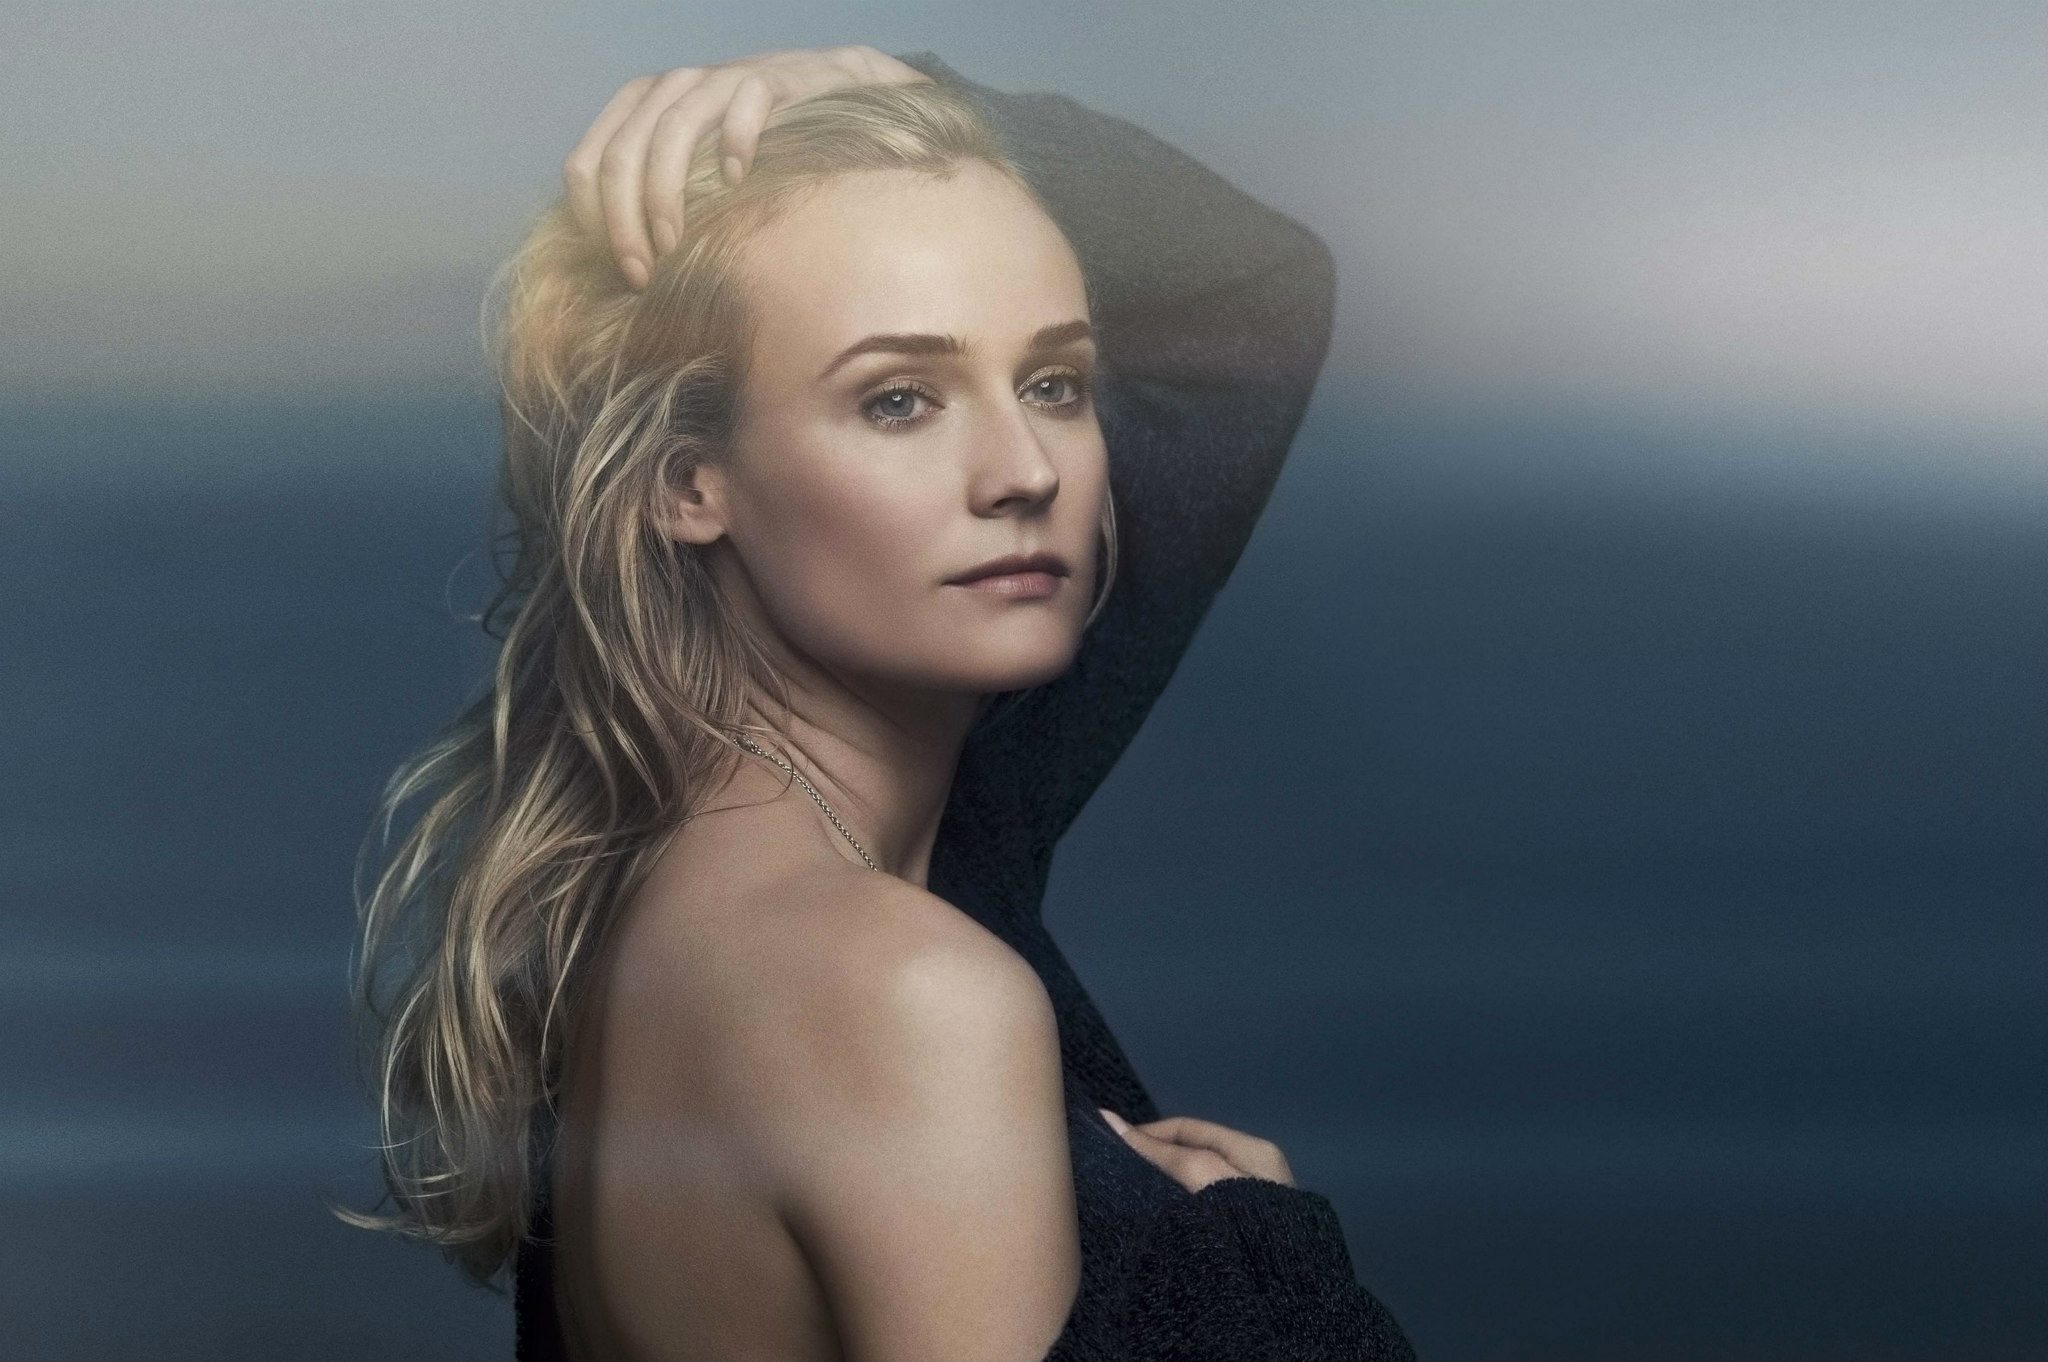 Diane Kruger photo 573 of 1748 pics, wallpaper - photo #631519 - ThePlace2